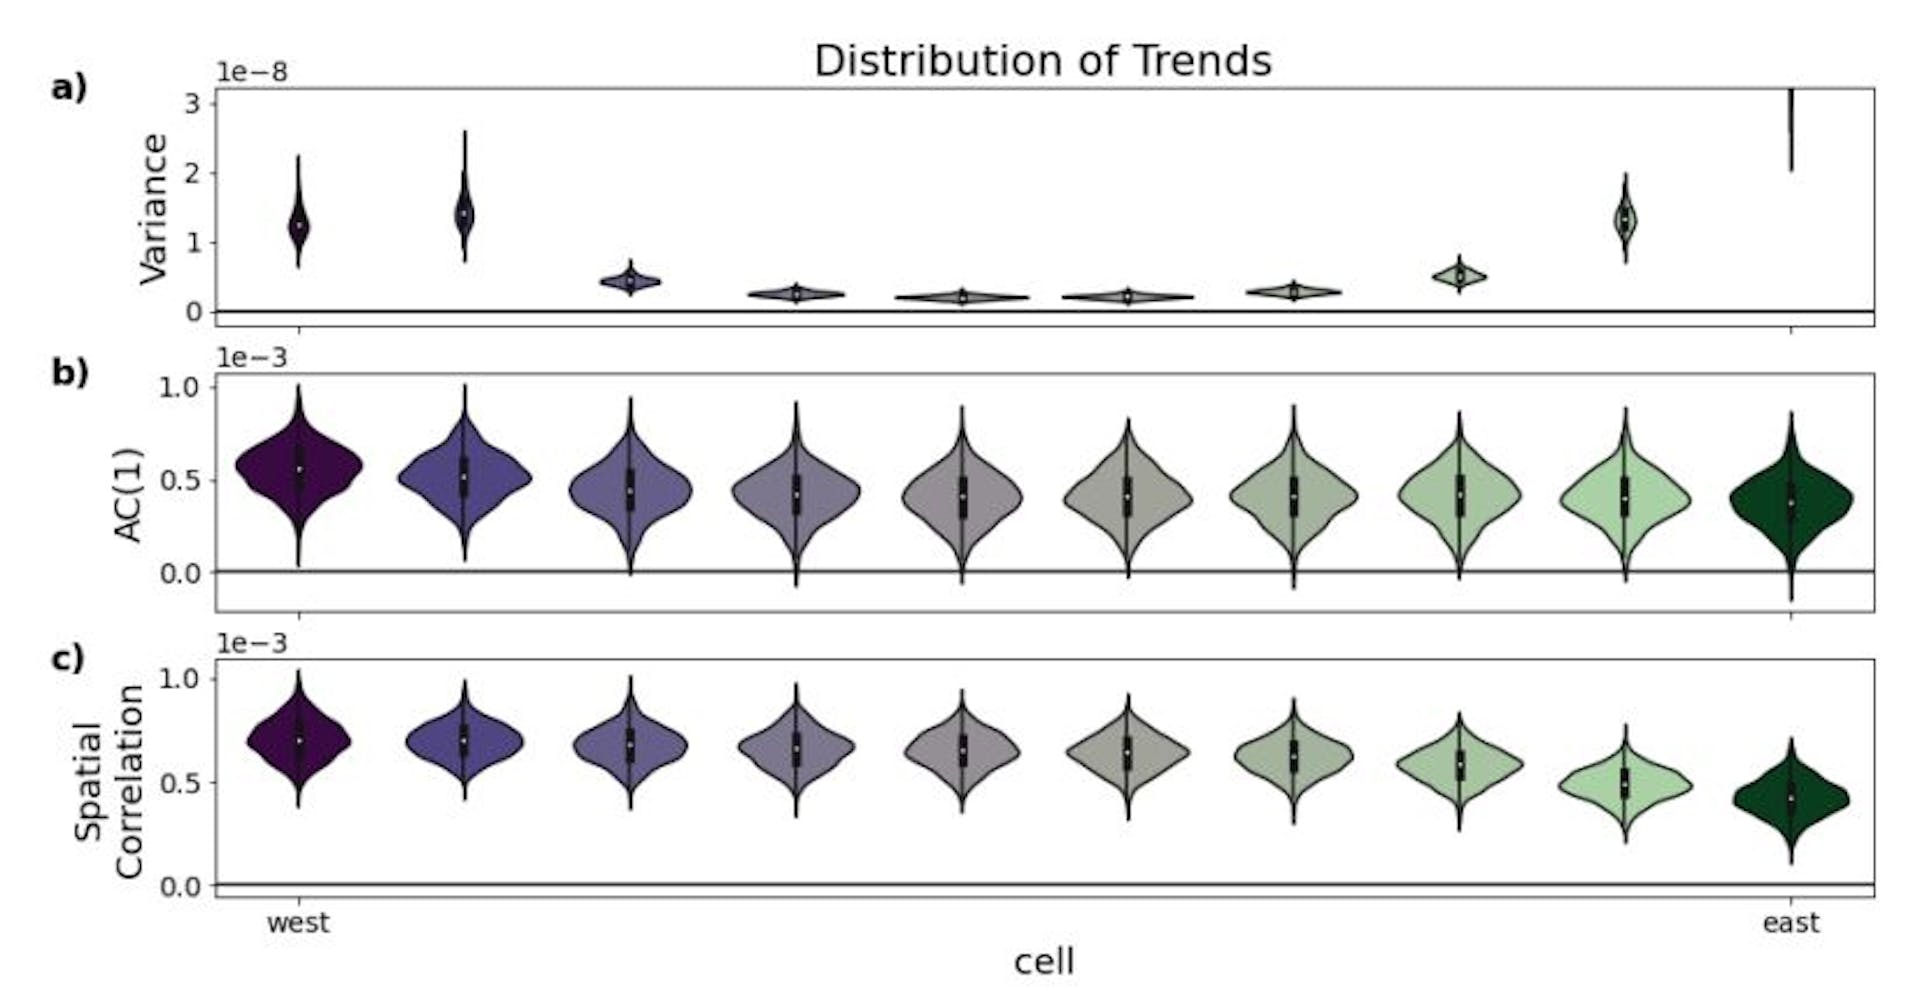 Figure S4: Trends of the indicators of CSD in the conceptual model. The violins represent the distribution of trends over 1000 realizations per cell for the three indicators variance, AC1, and spatial correlation.